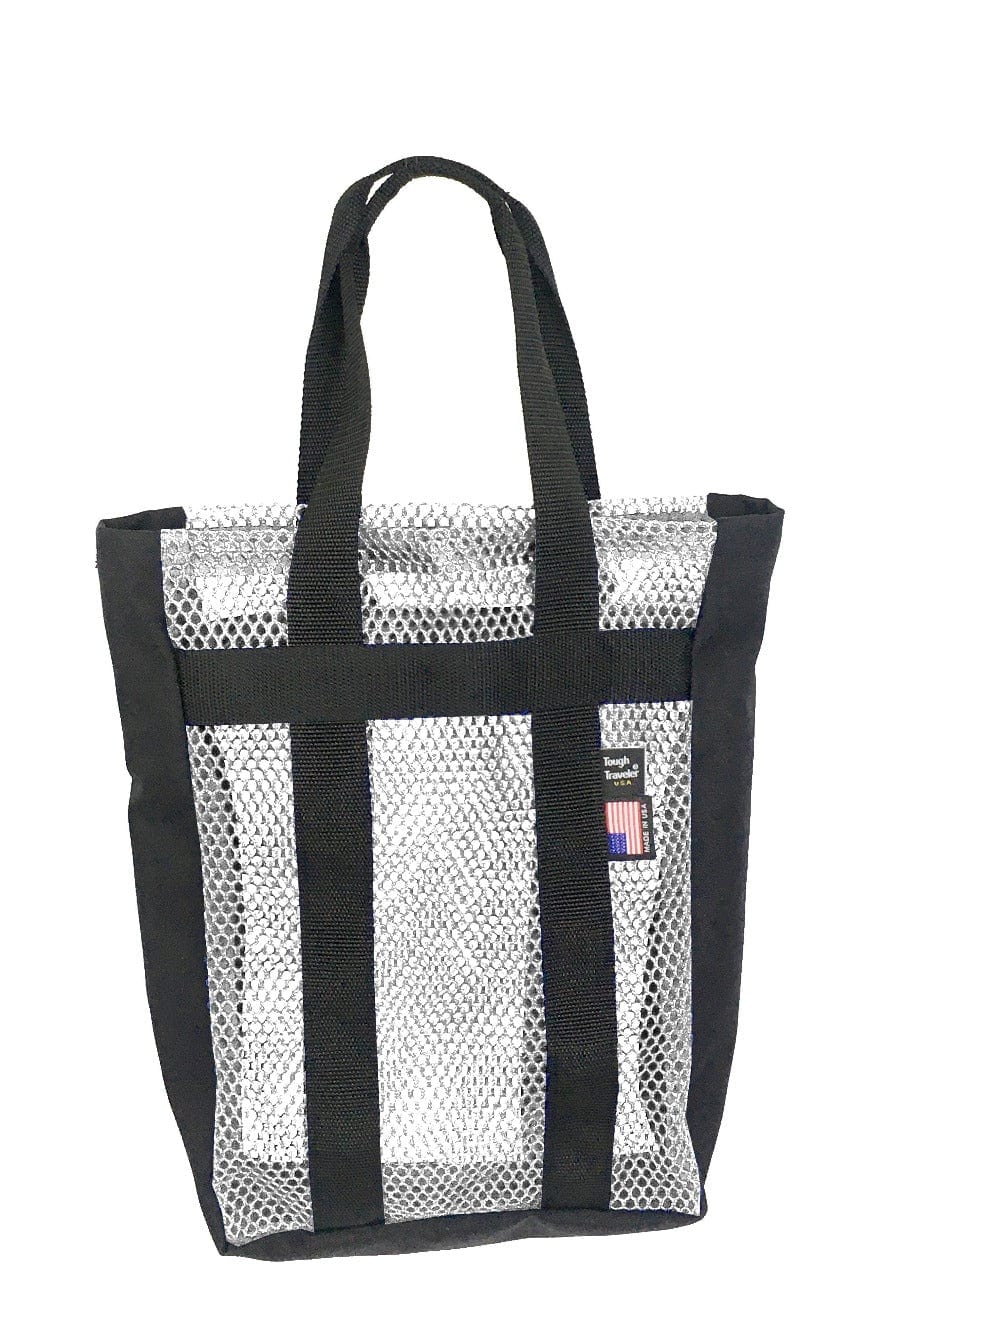 Made in USA VM Tote Tote Bags